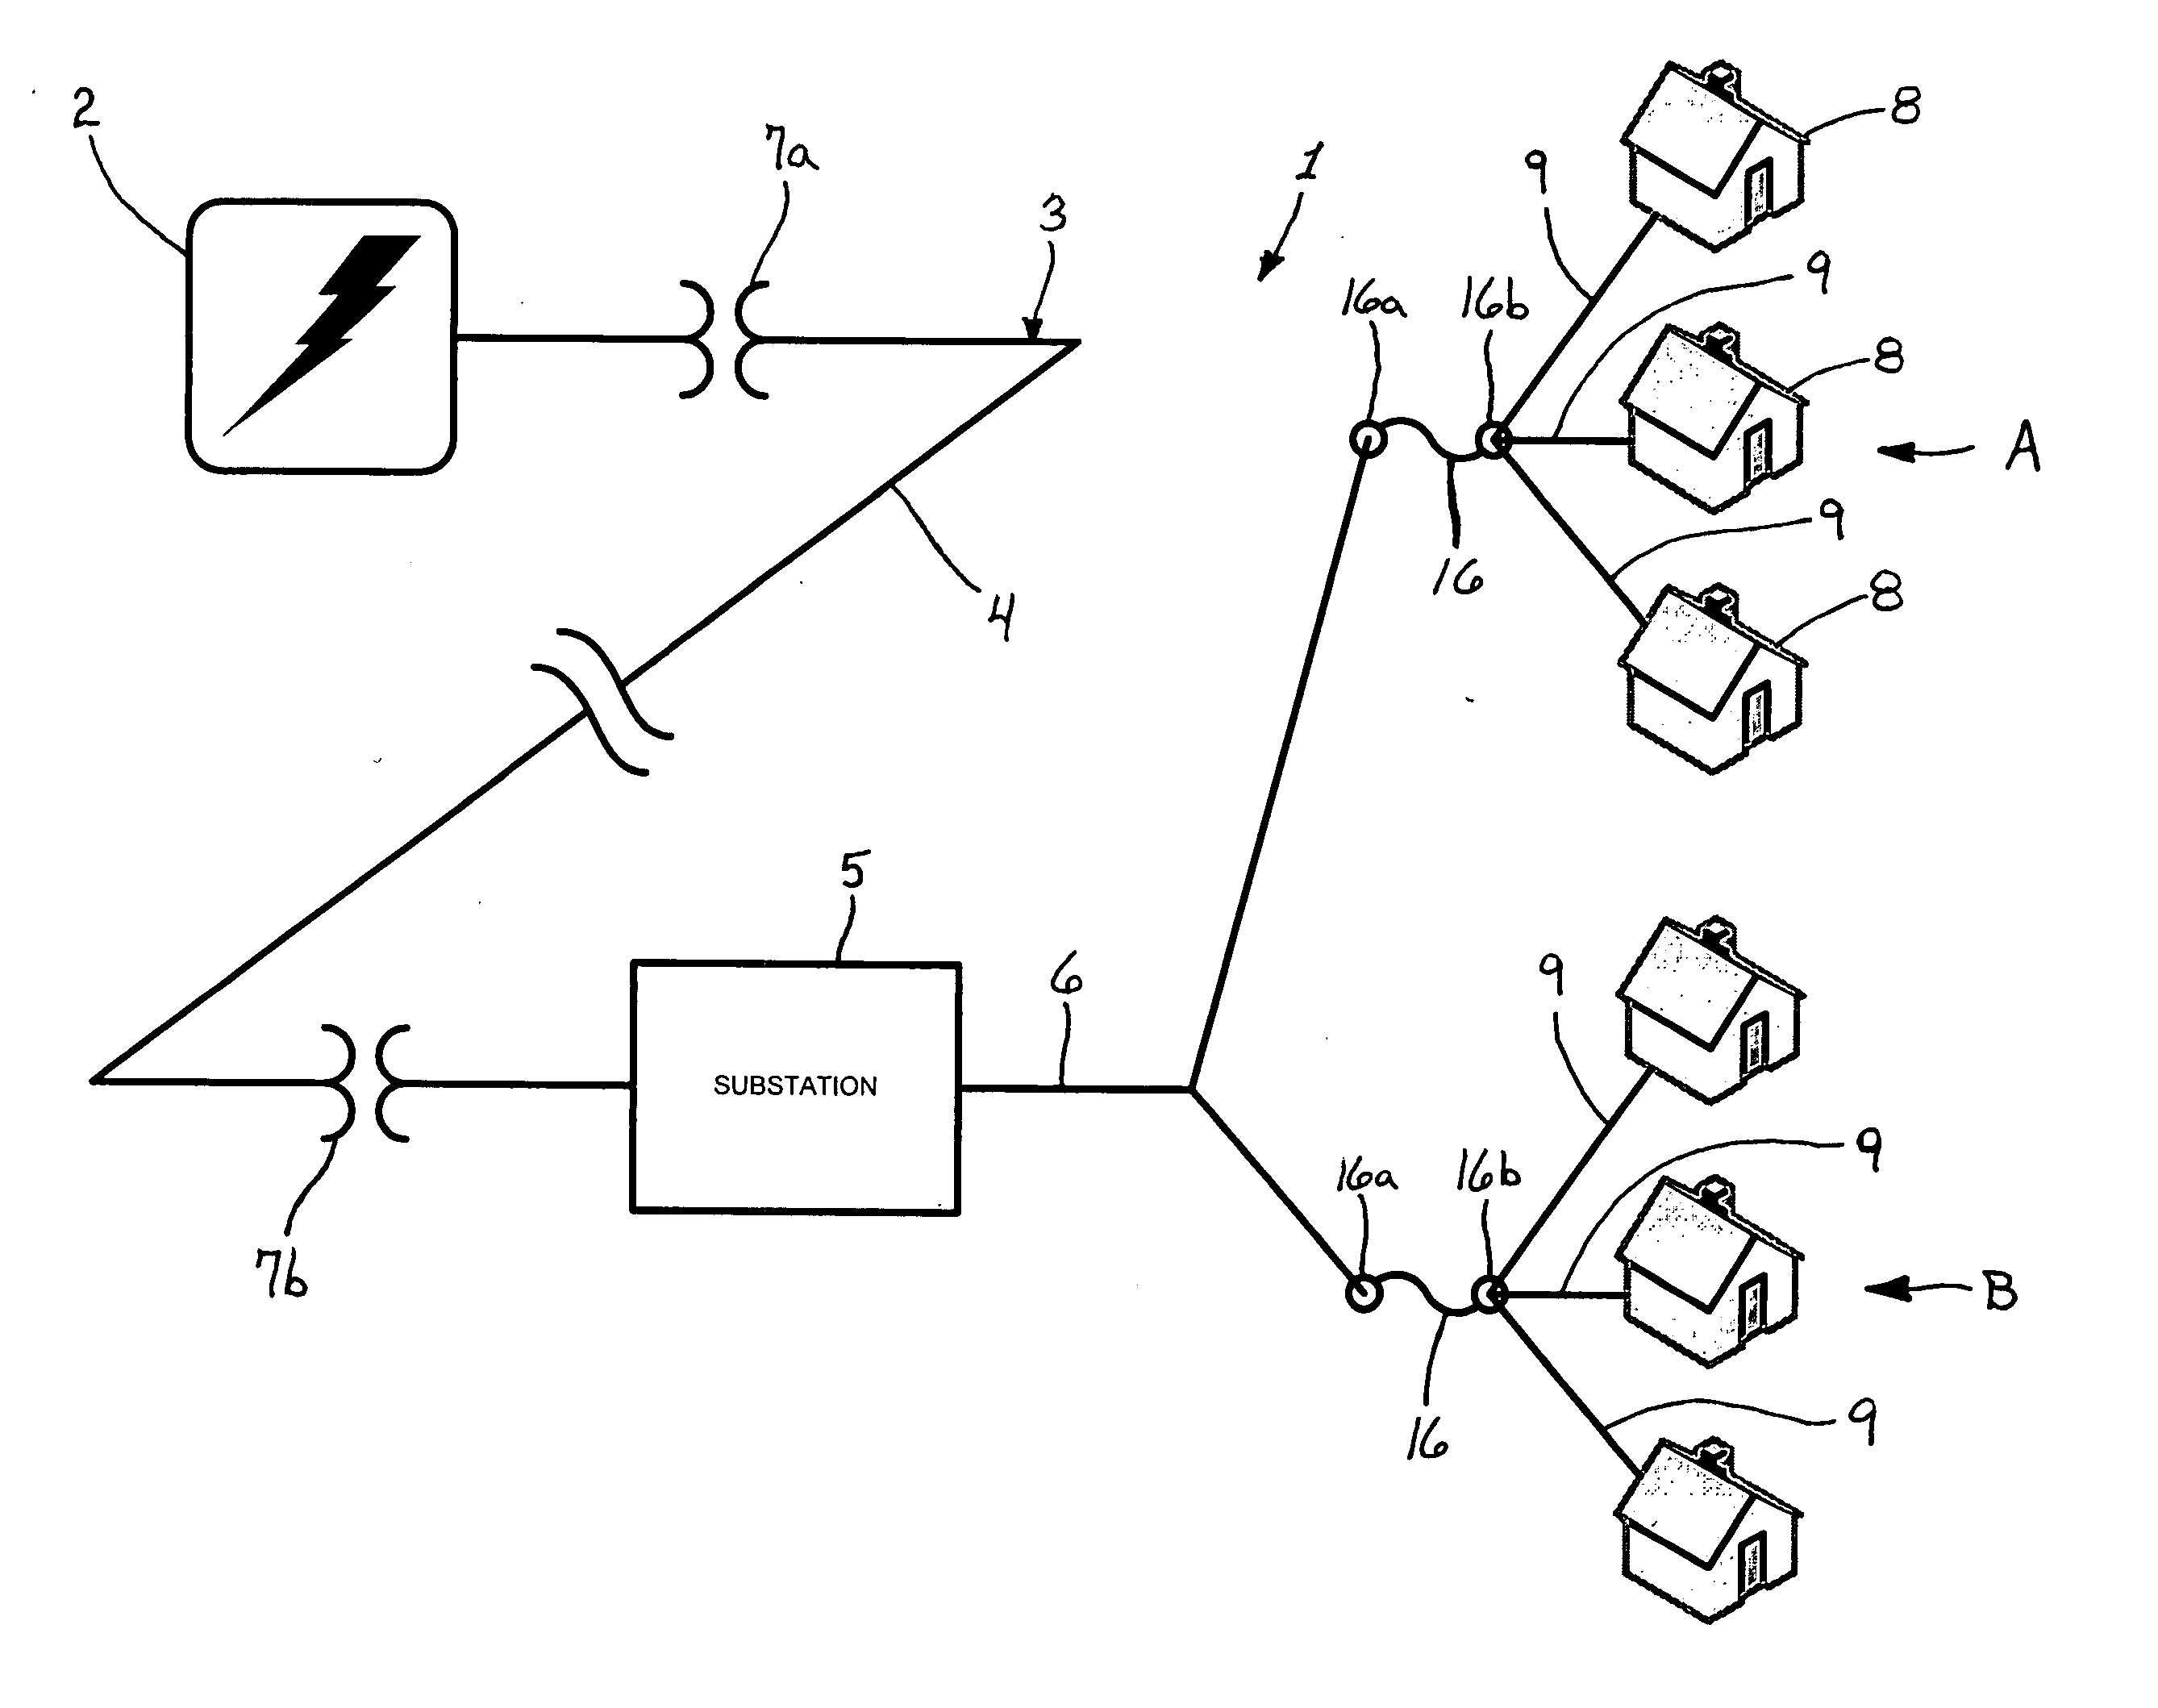 Adaptive relaying controlled by autonomous event detection